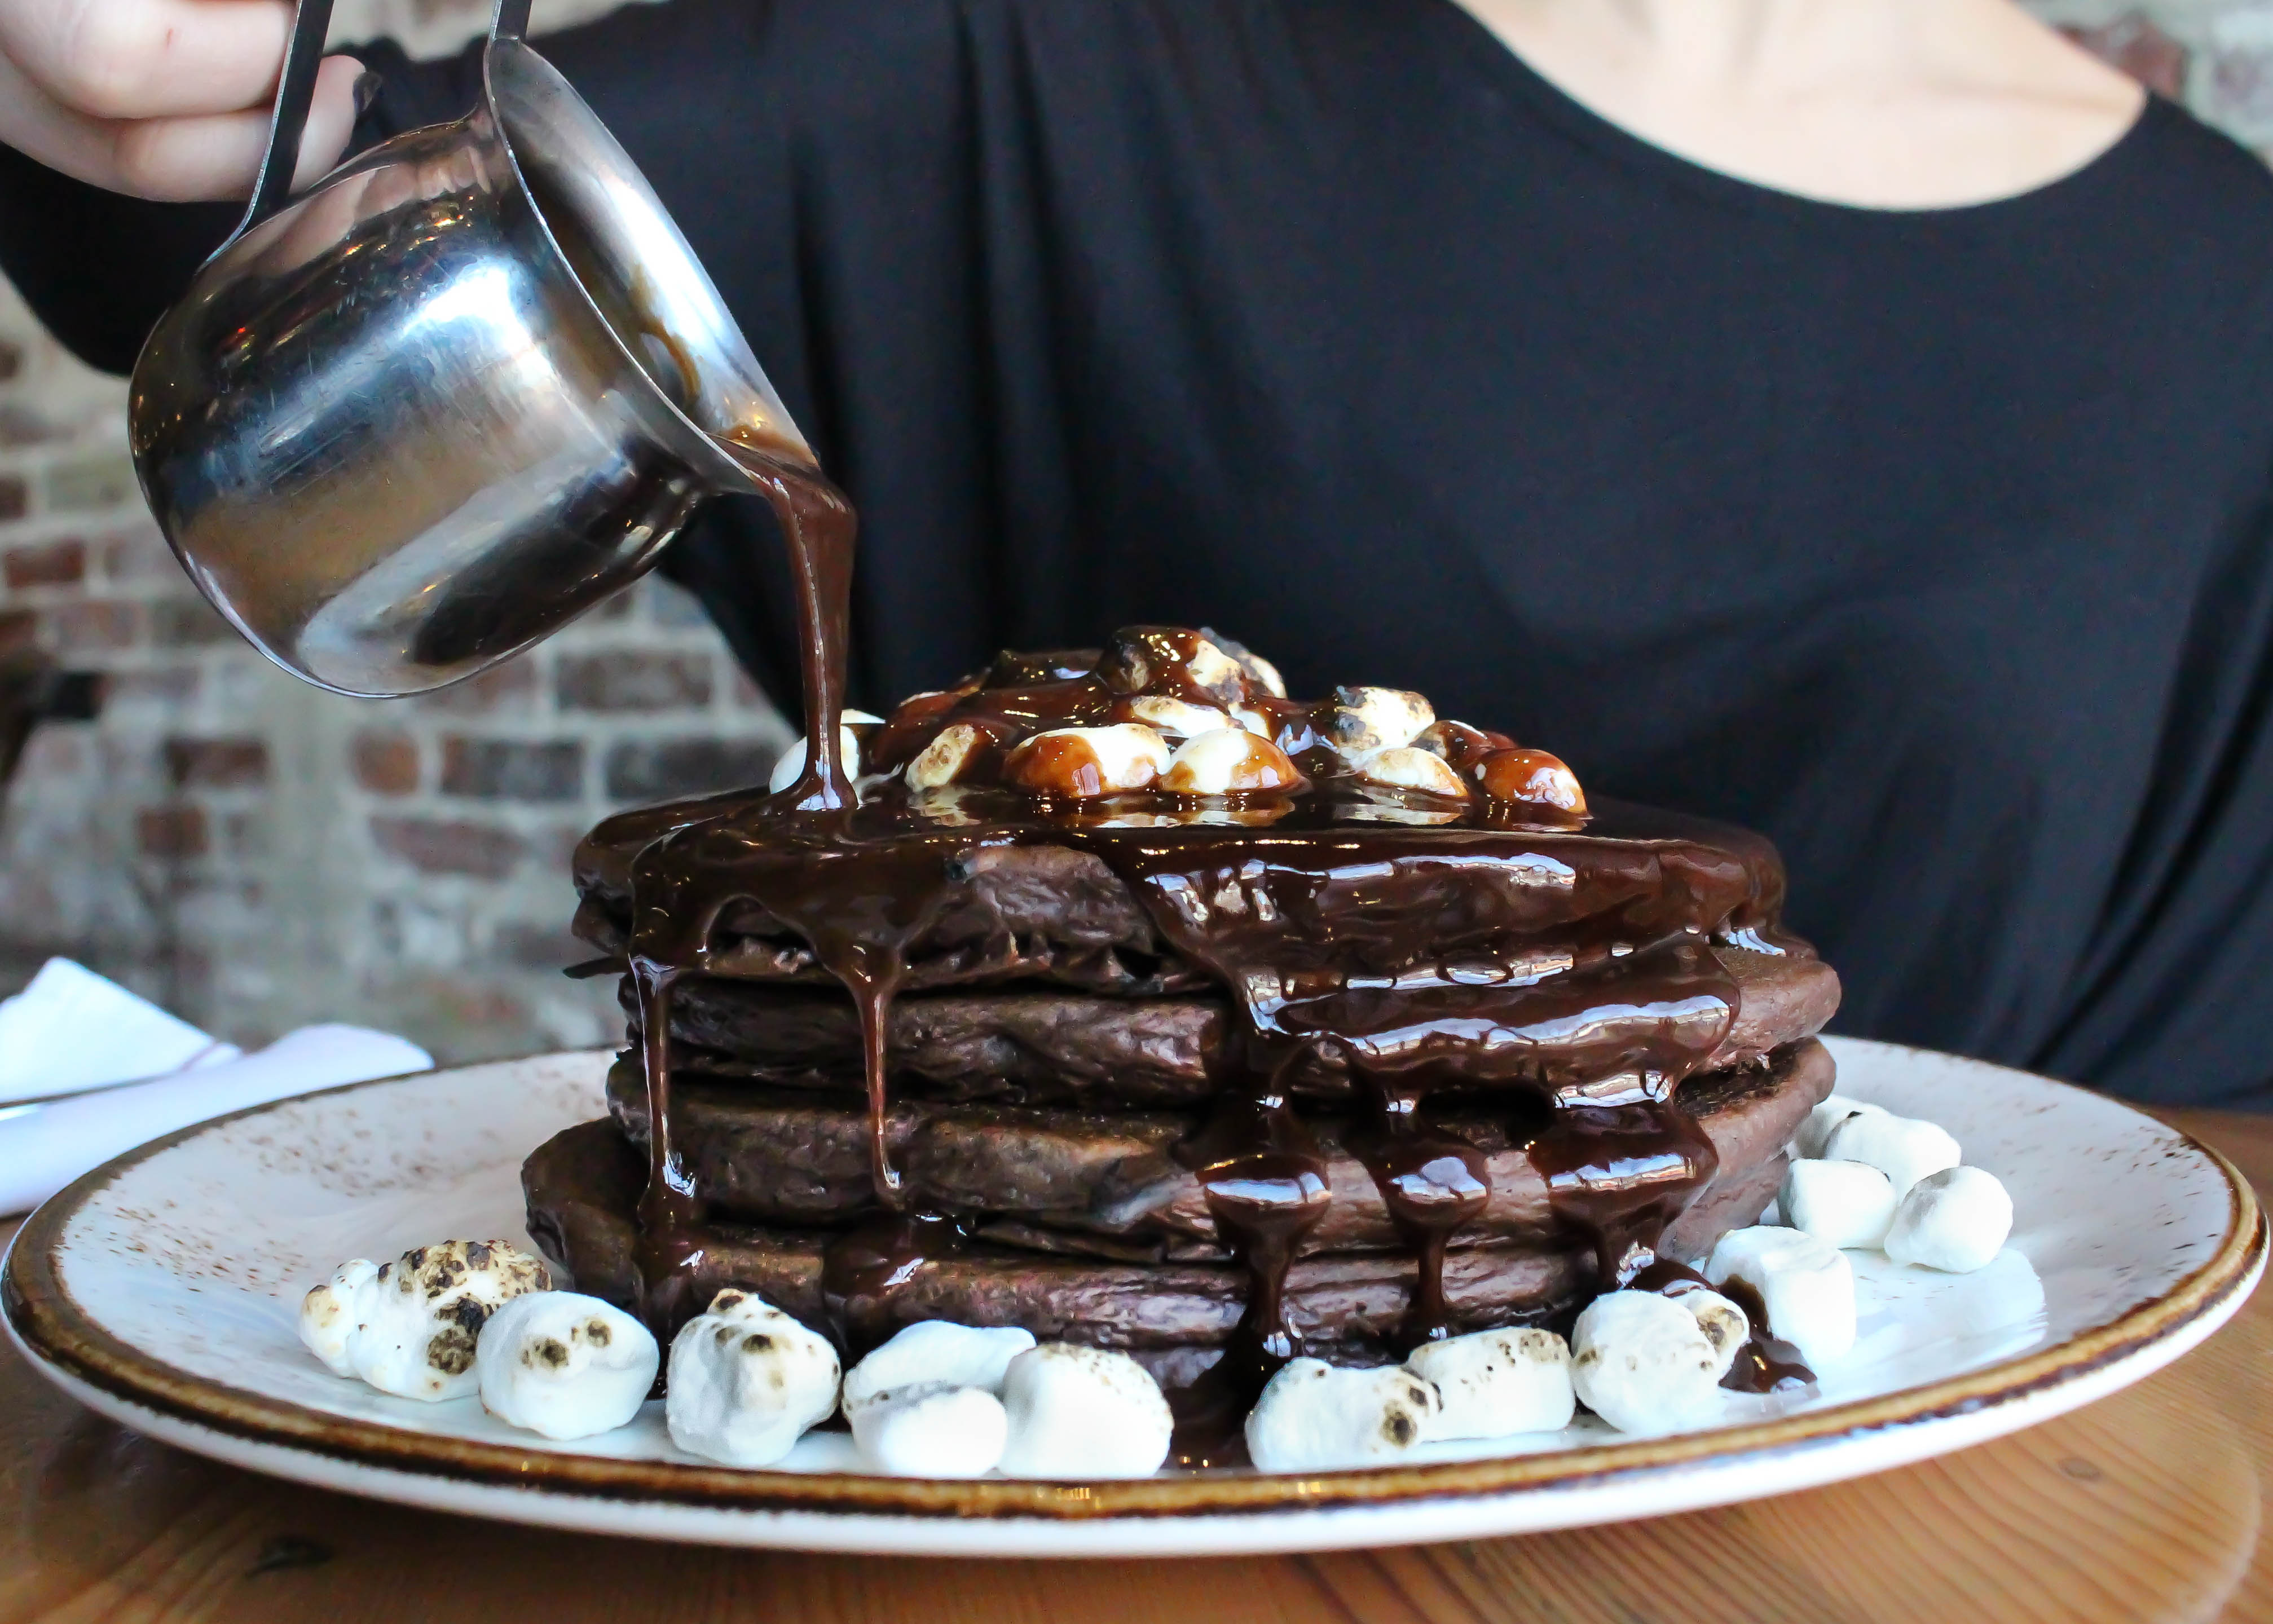 A stack of dark brown pancakes - made with hot chocolate - is topped with marshmallows. A person whose face isn’t visible in the photo pours a metal container of chocolate sauce over the stack.